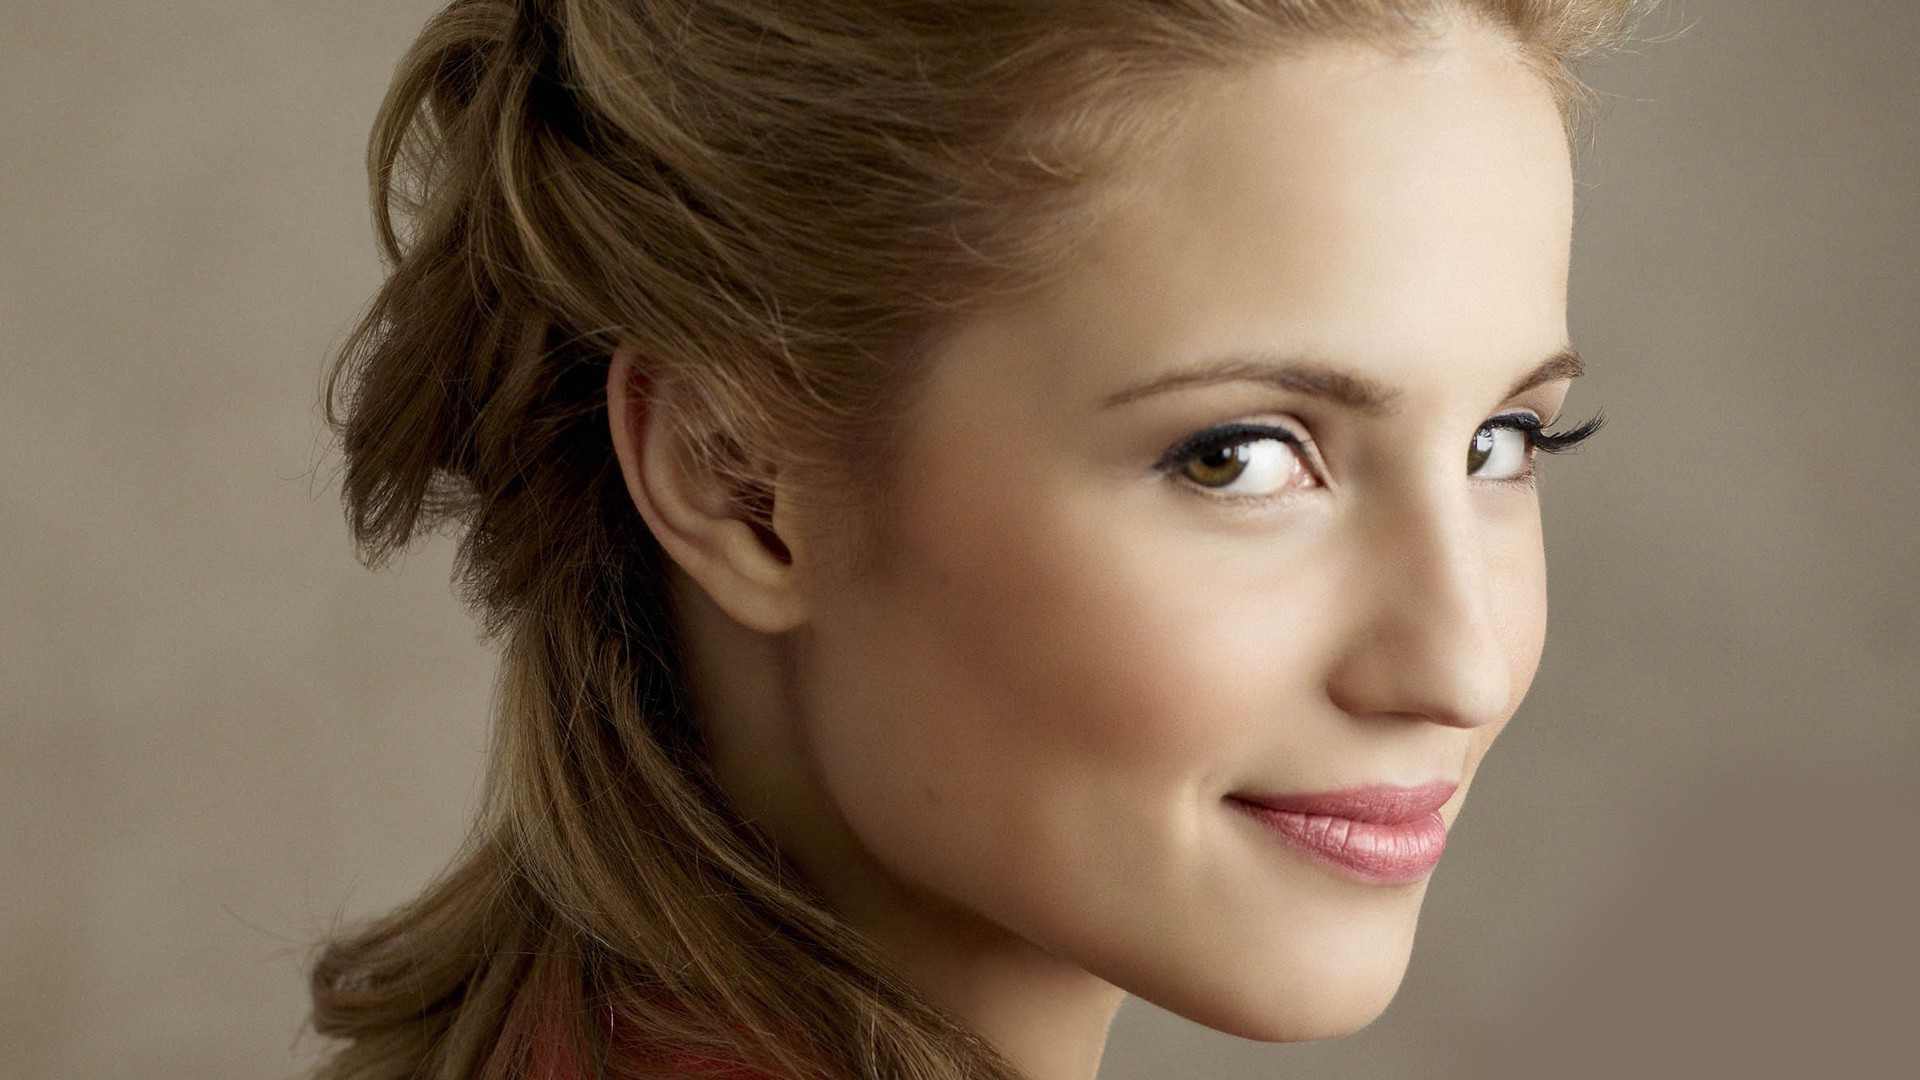 Dianna Agron Wallpapers High Quality | Download Free